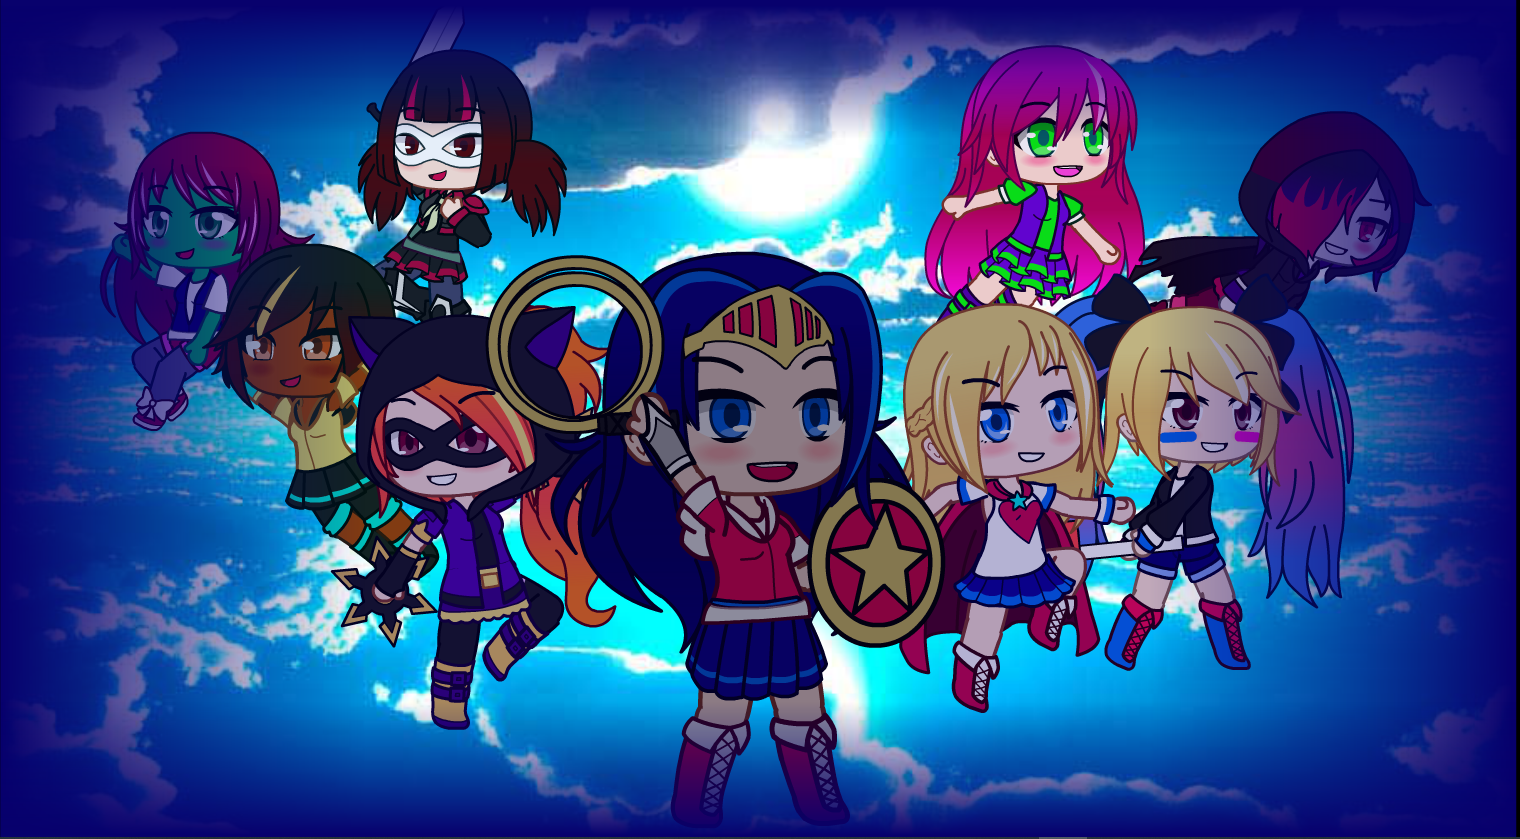 Hurricane Polymar Sailor Moon And Other Classic Super Heroes Anime Shows   IWMBuzz